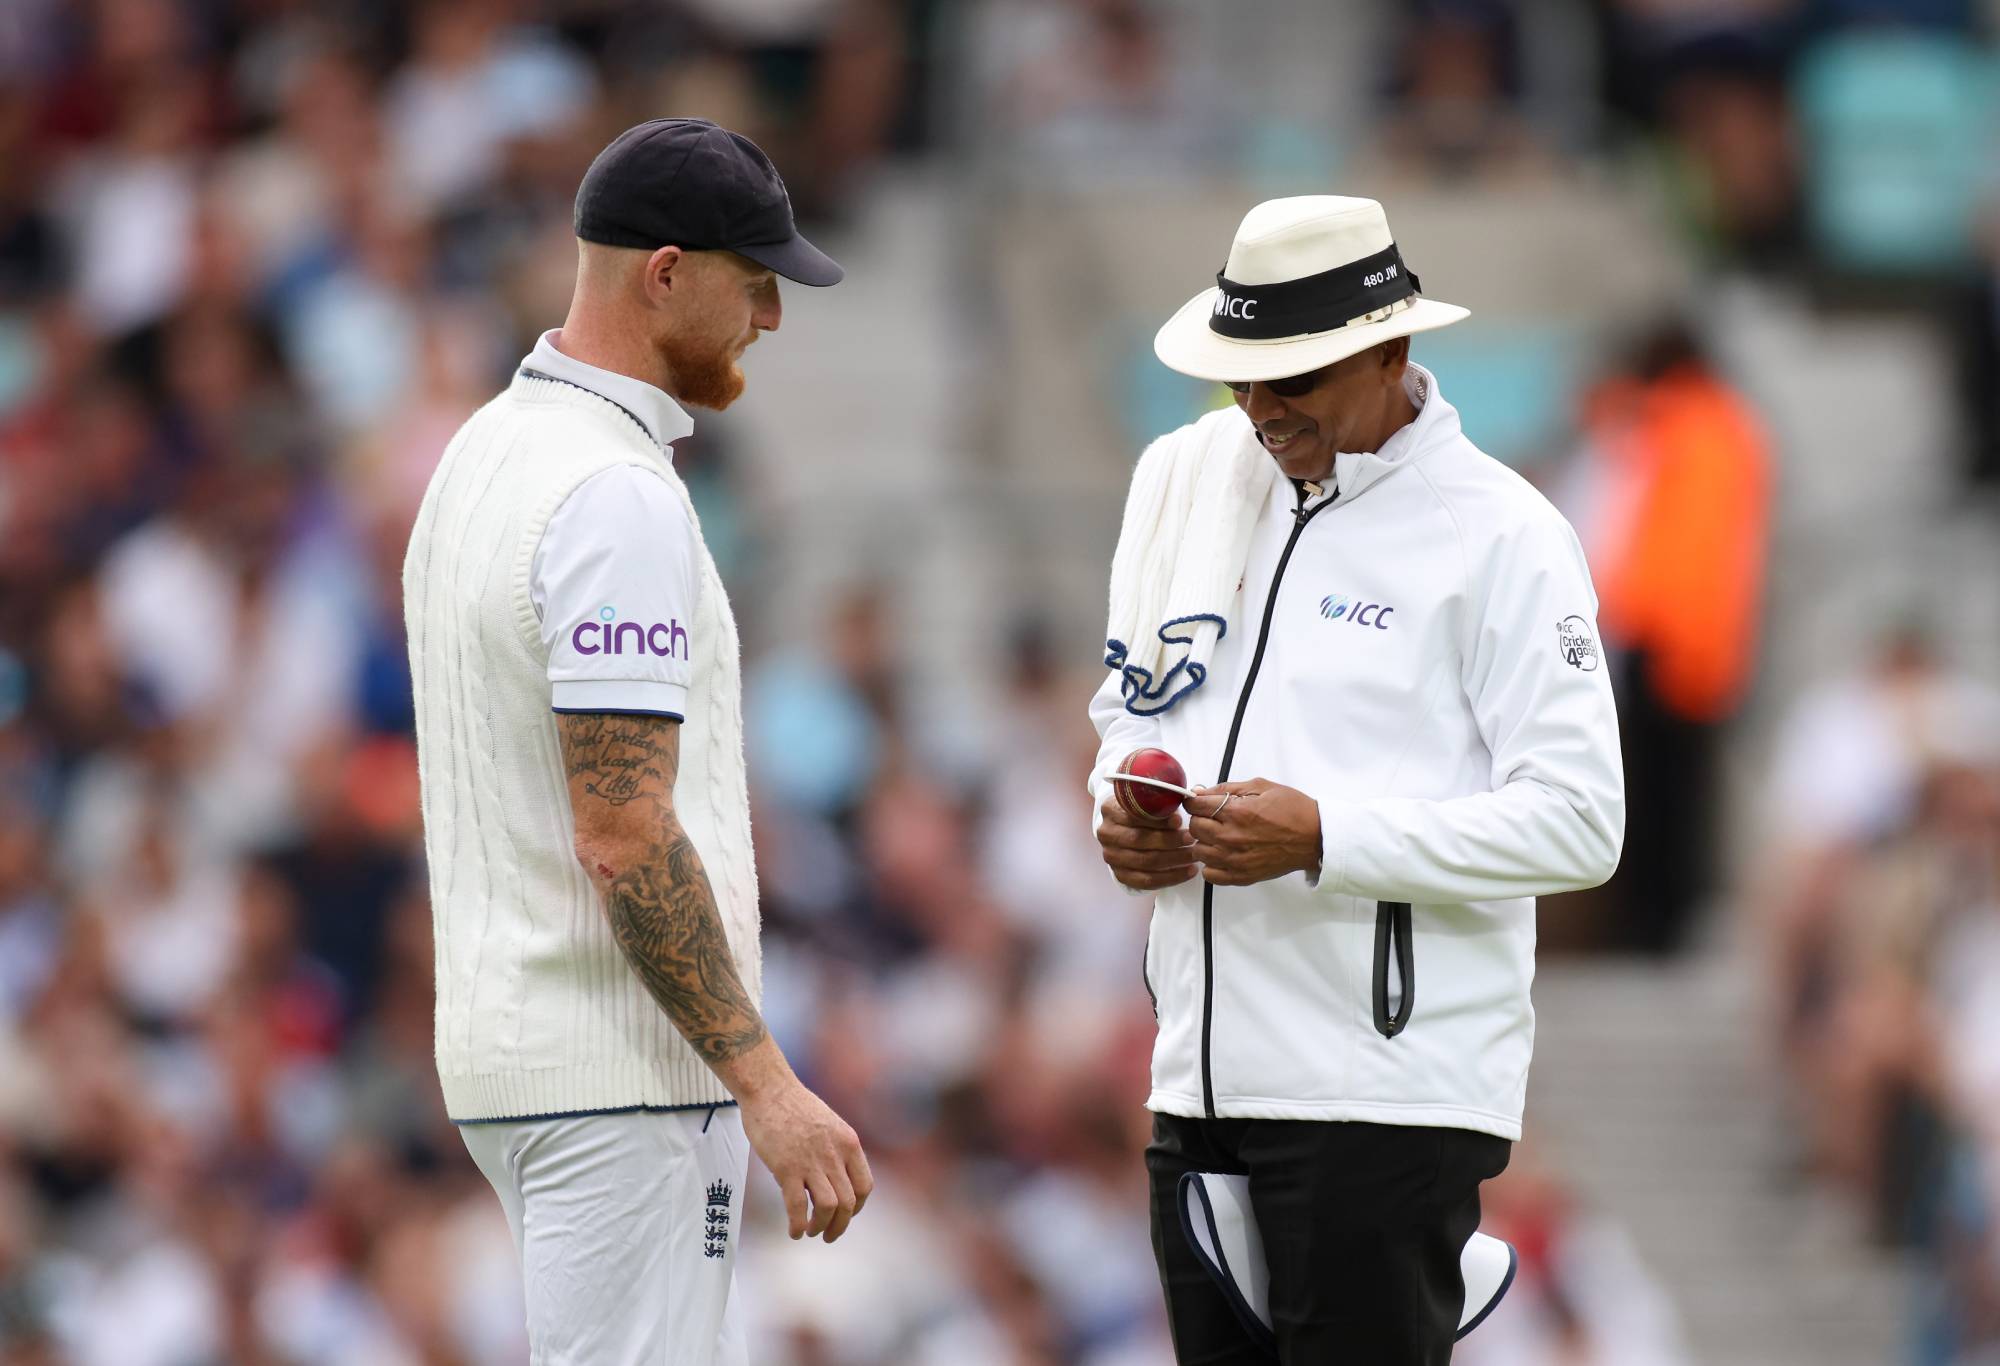 LONDON, ENGLAND - JULY 28: Ben Stokes of England talks with umpire Joel Wilson after he requested the ball to be changed and it was denied, during Day Two of the LV= Insurance Ashes 5th Test Match between England and Australia at The Kia Oval on July 28, 2023 in London, England. (Photo by Ryan Pierse/Getty Images)